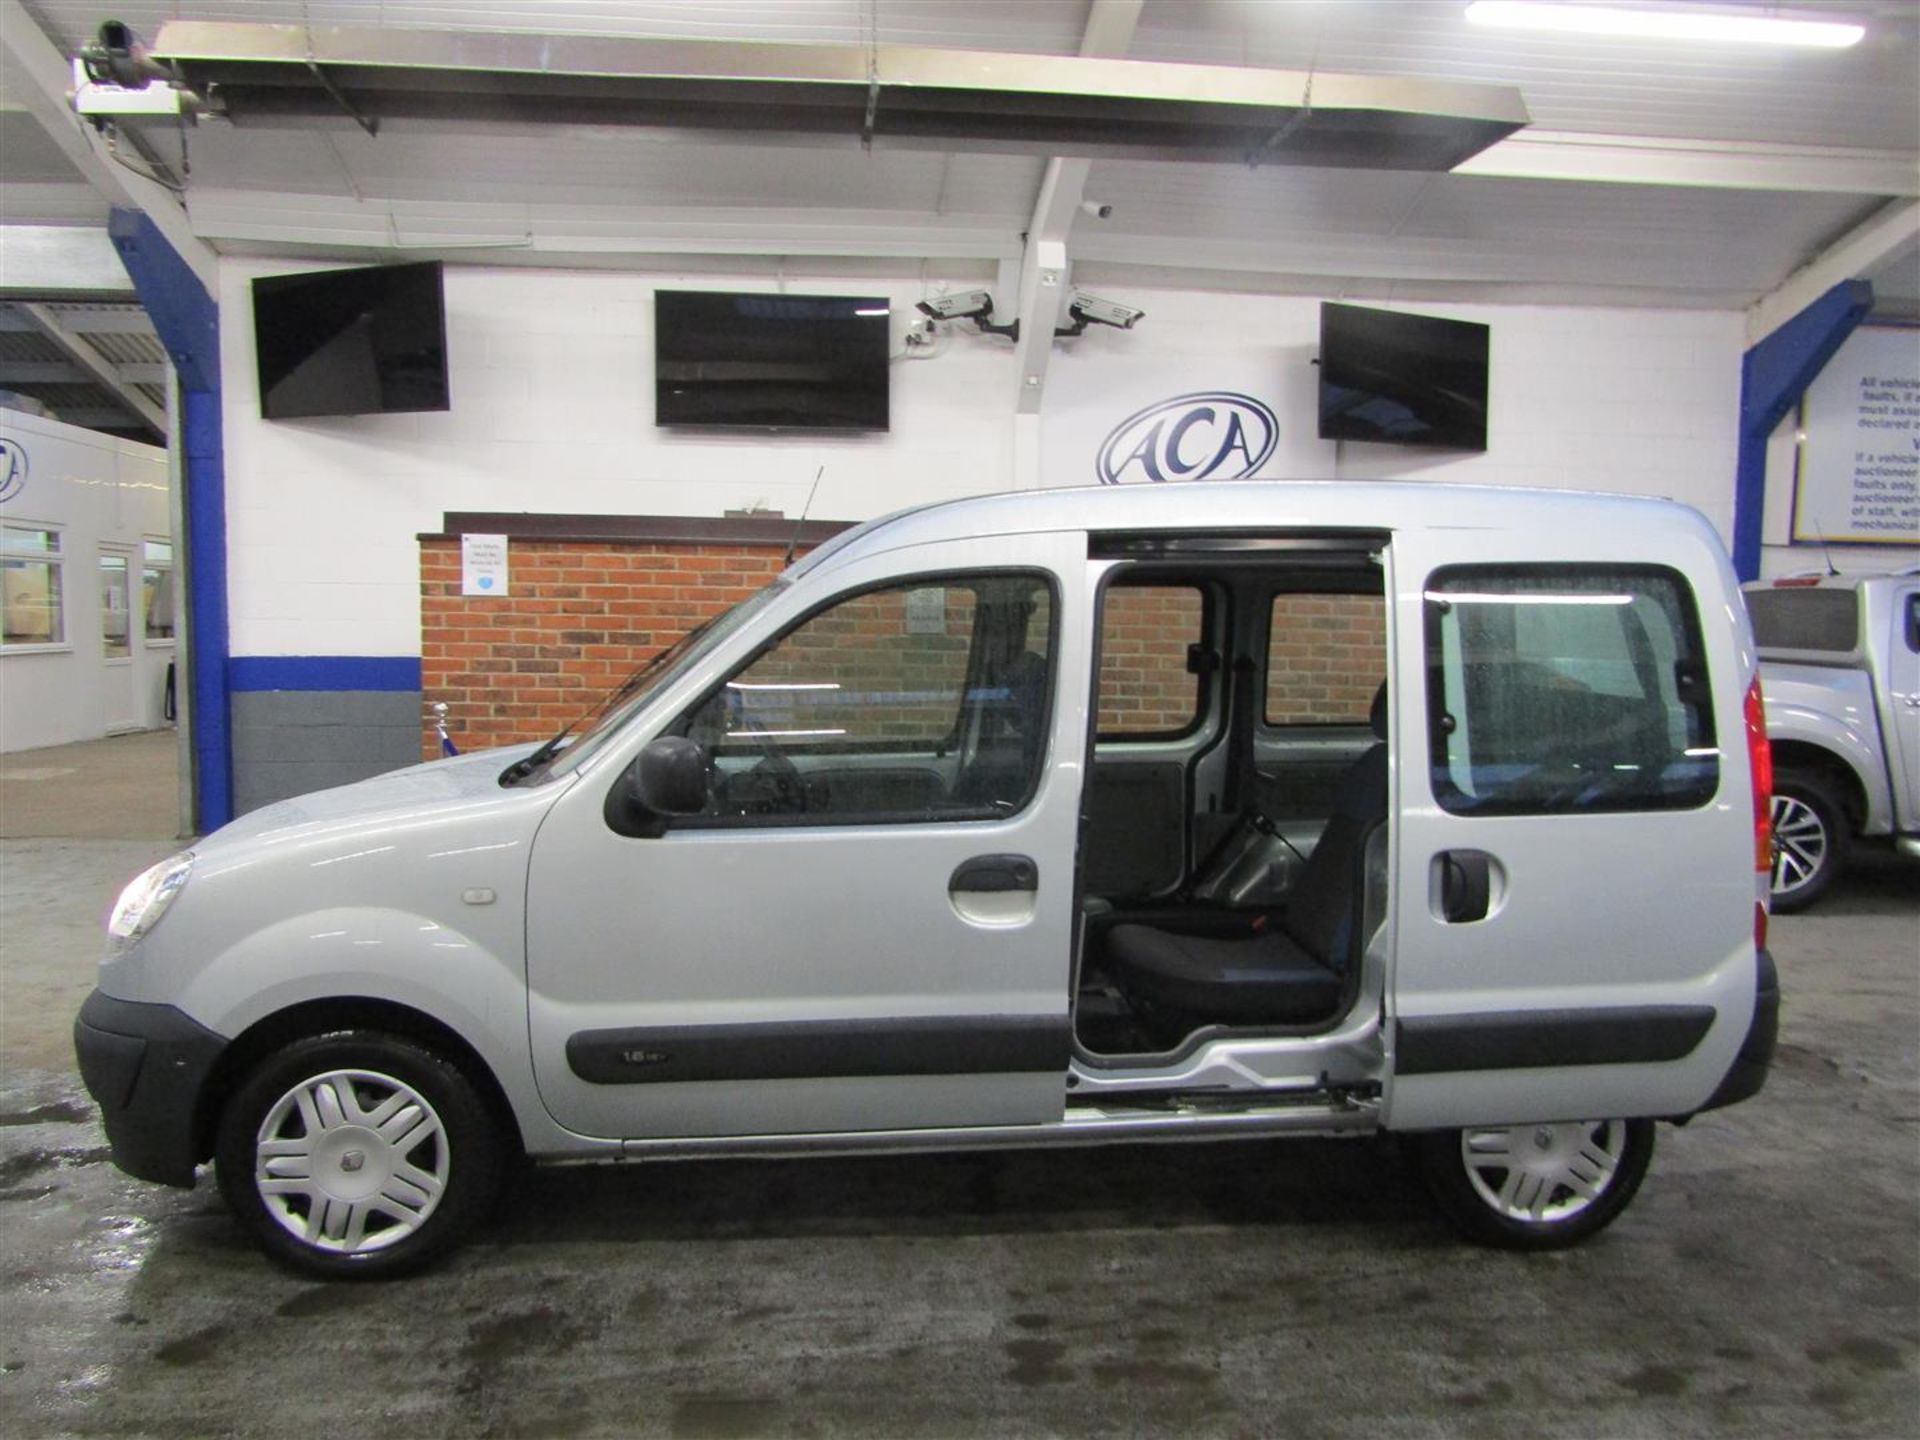 08 08 Renault Kangoo Authentique A - Image 3 of 28